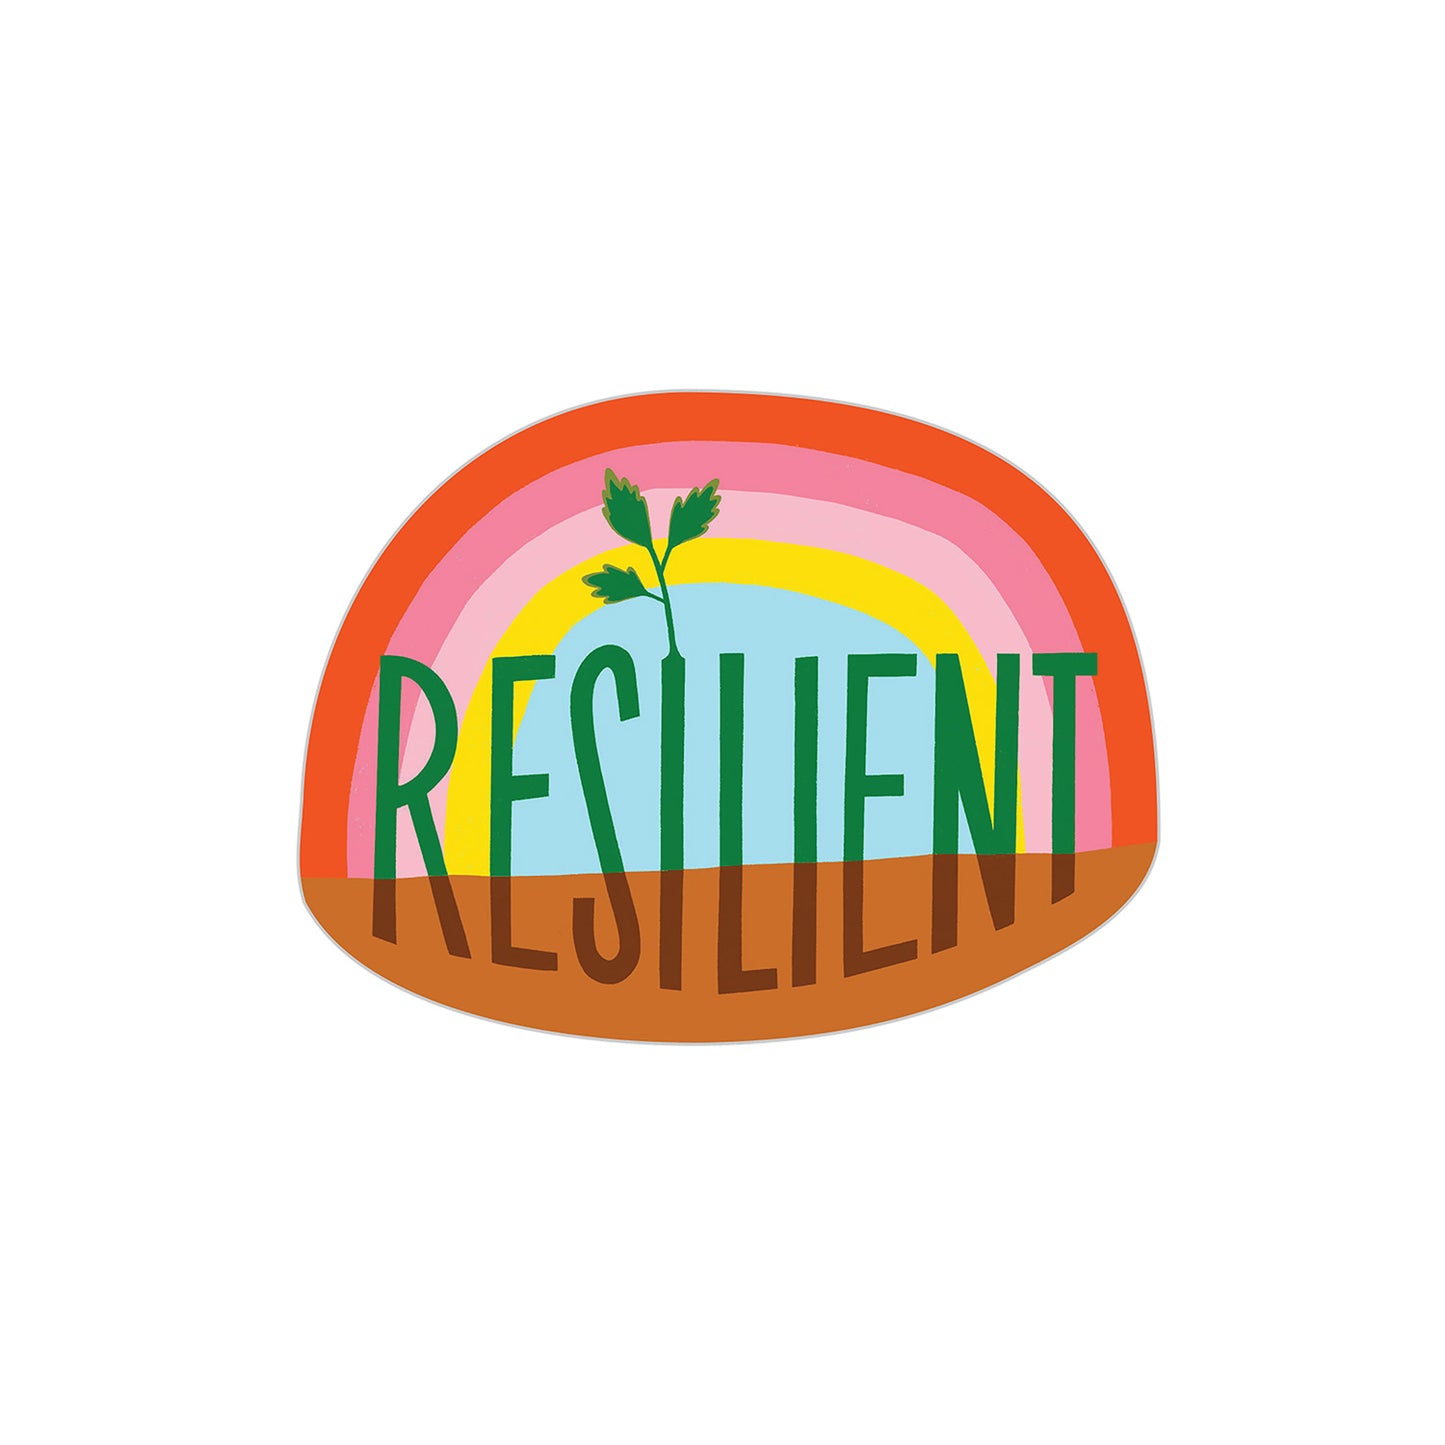 Resilient Sticker Card